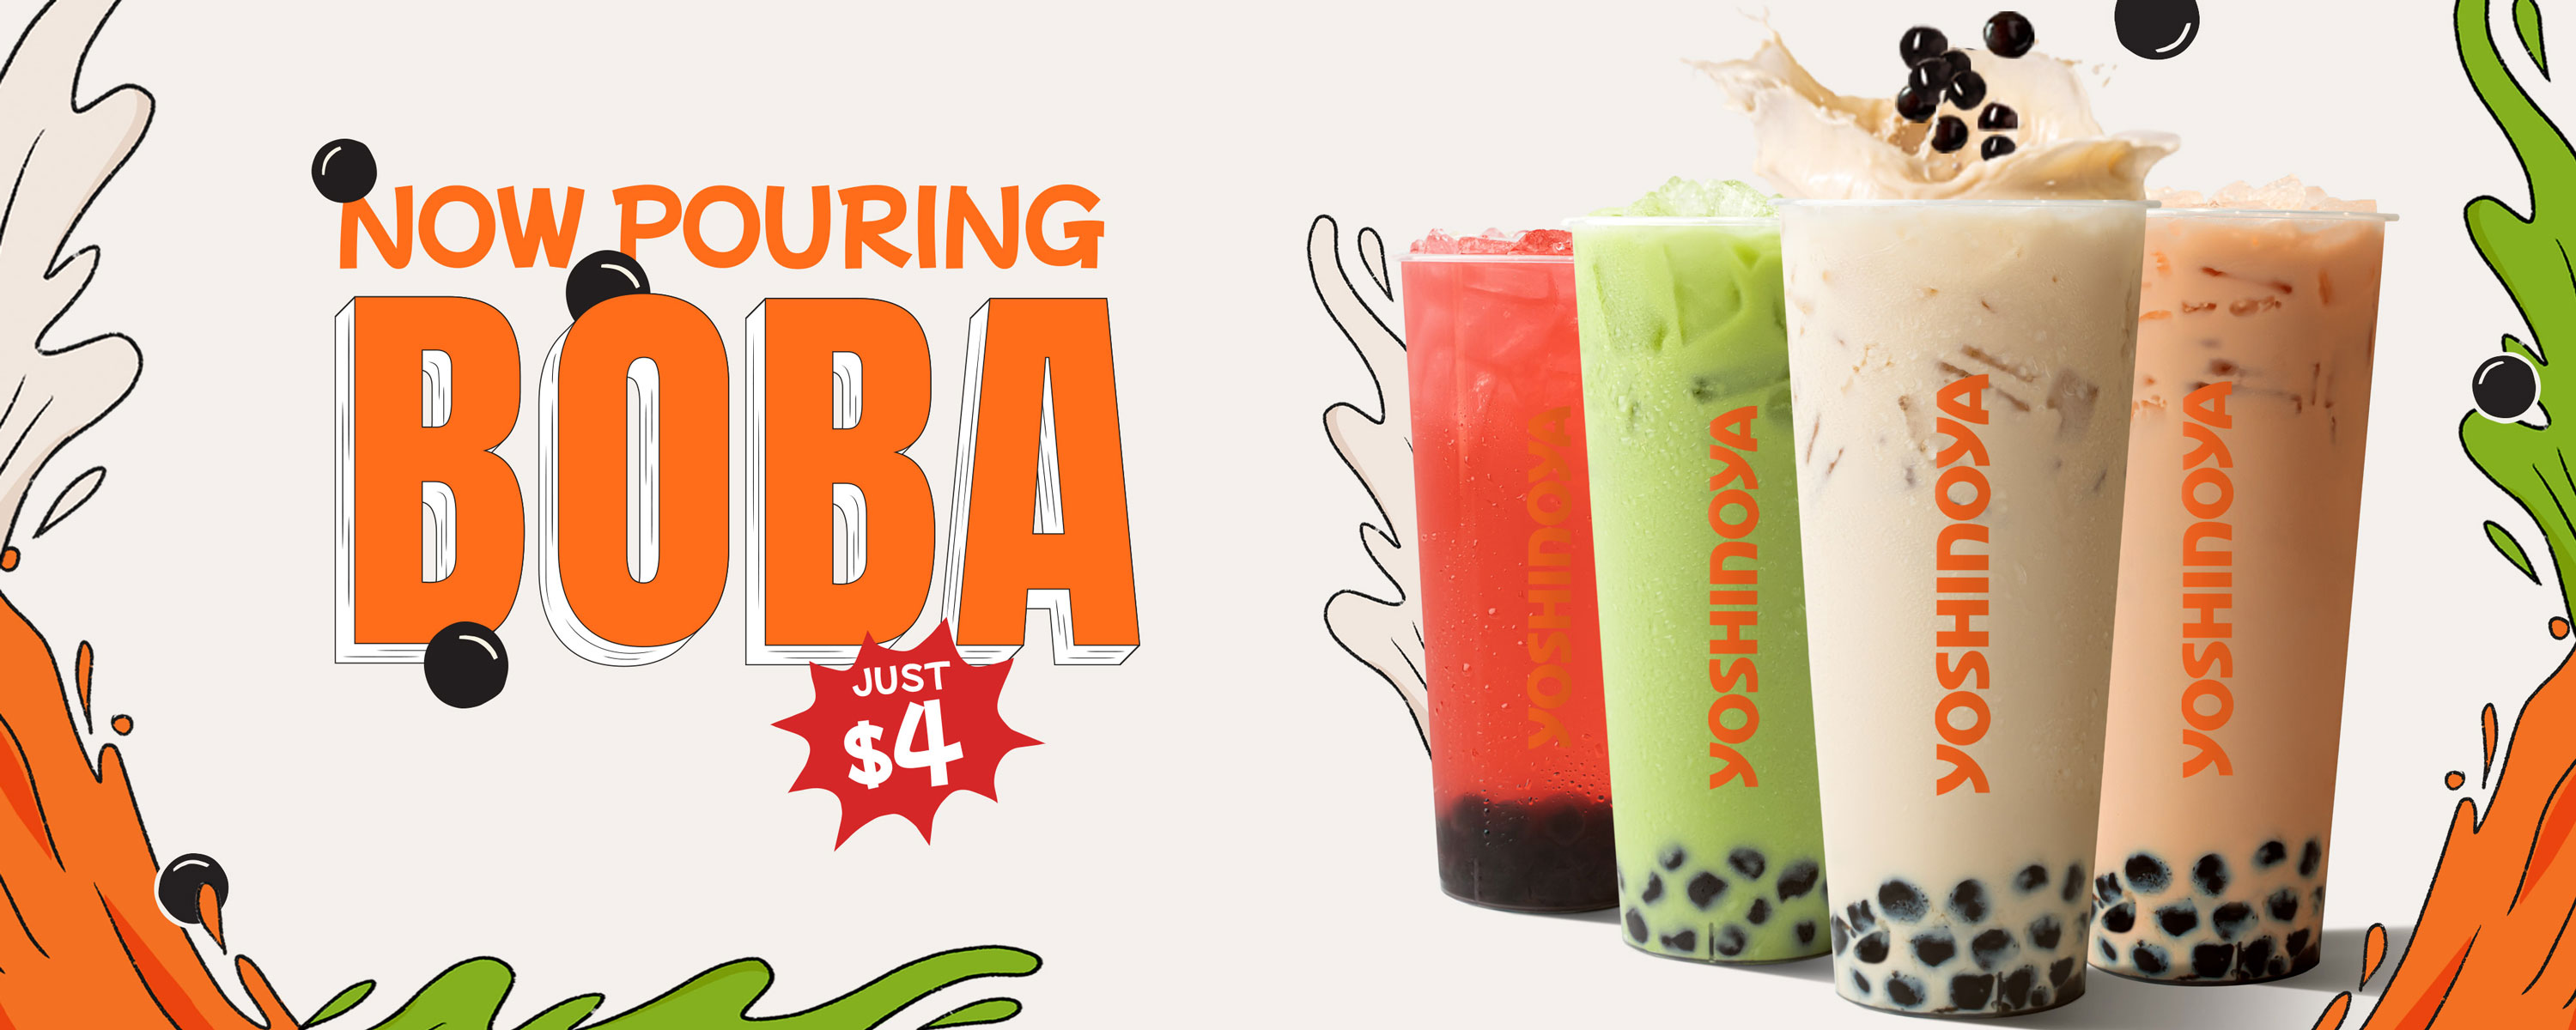 NOW POURING BOBA JUST $4